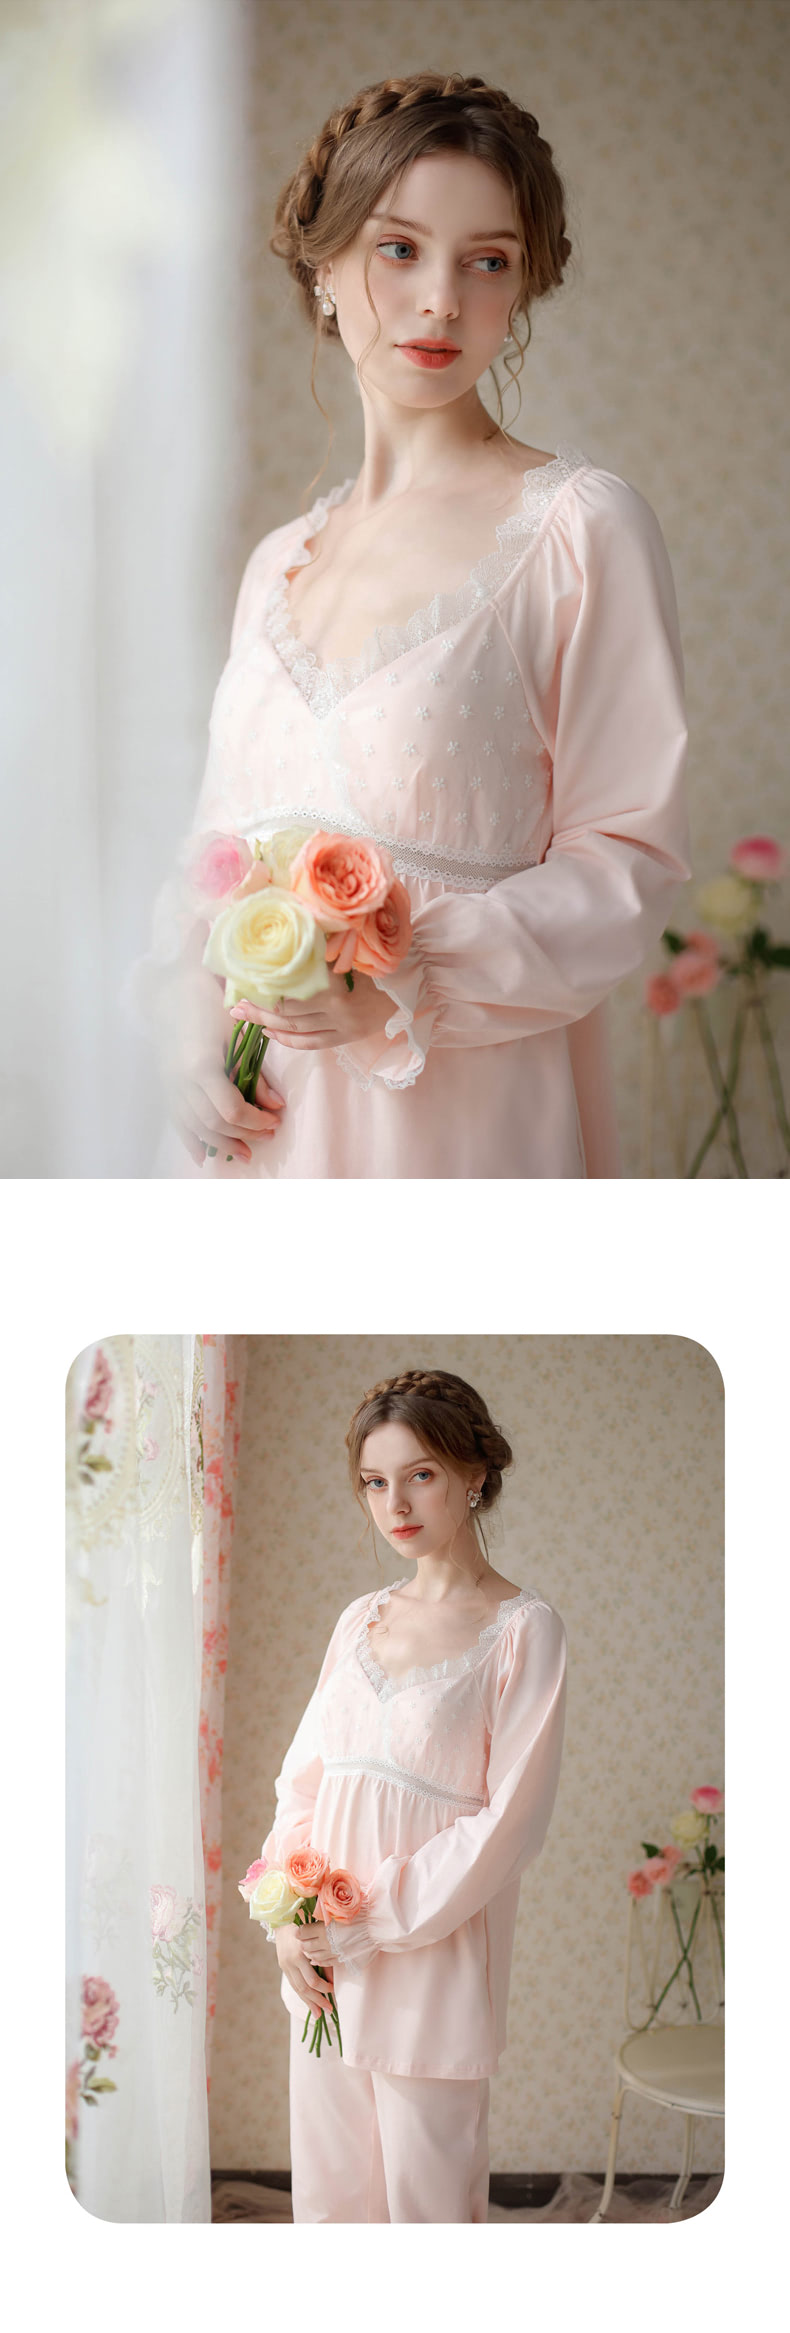 Vintage-Sweet-Cotton-Long-Sleeve-Home-Casual-Clothes-Set14.jpg